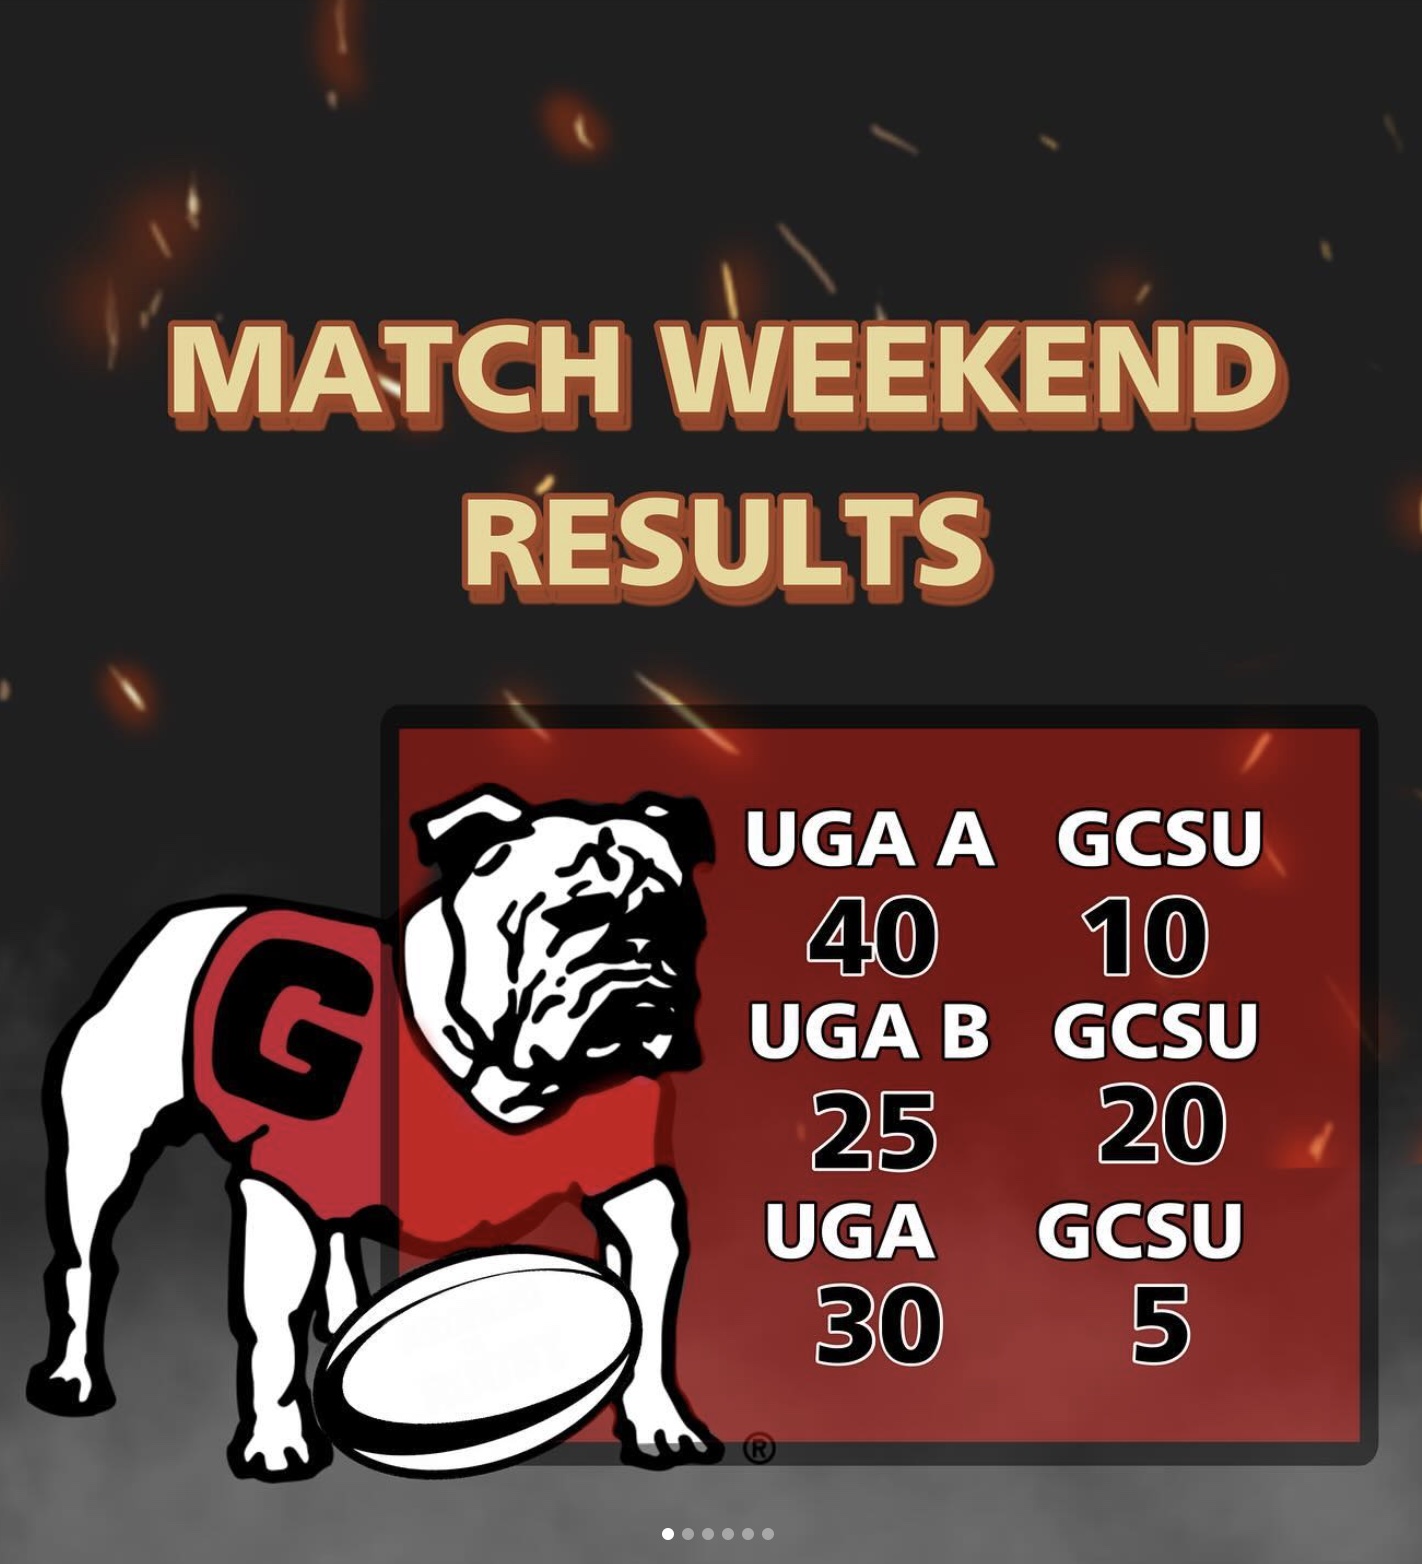 picture of UGAWFRC instagram post that shows match scores from the game played on march 16th